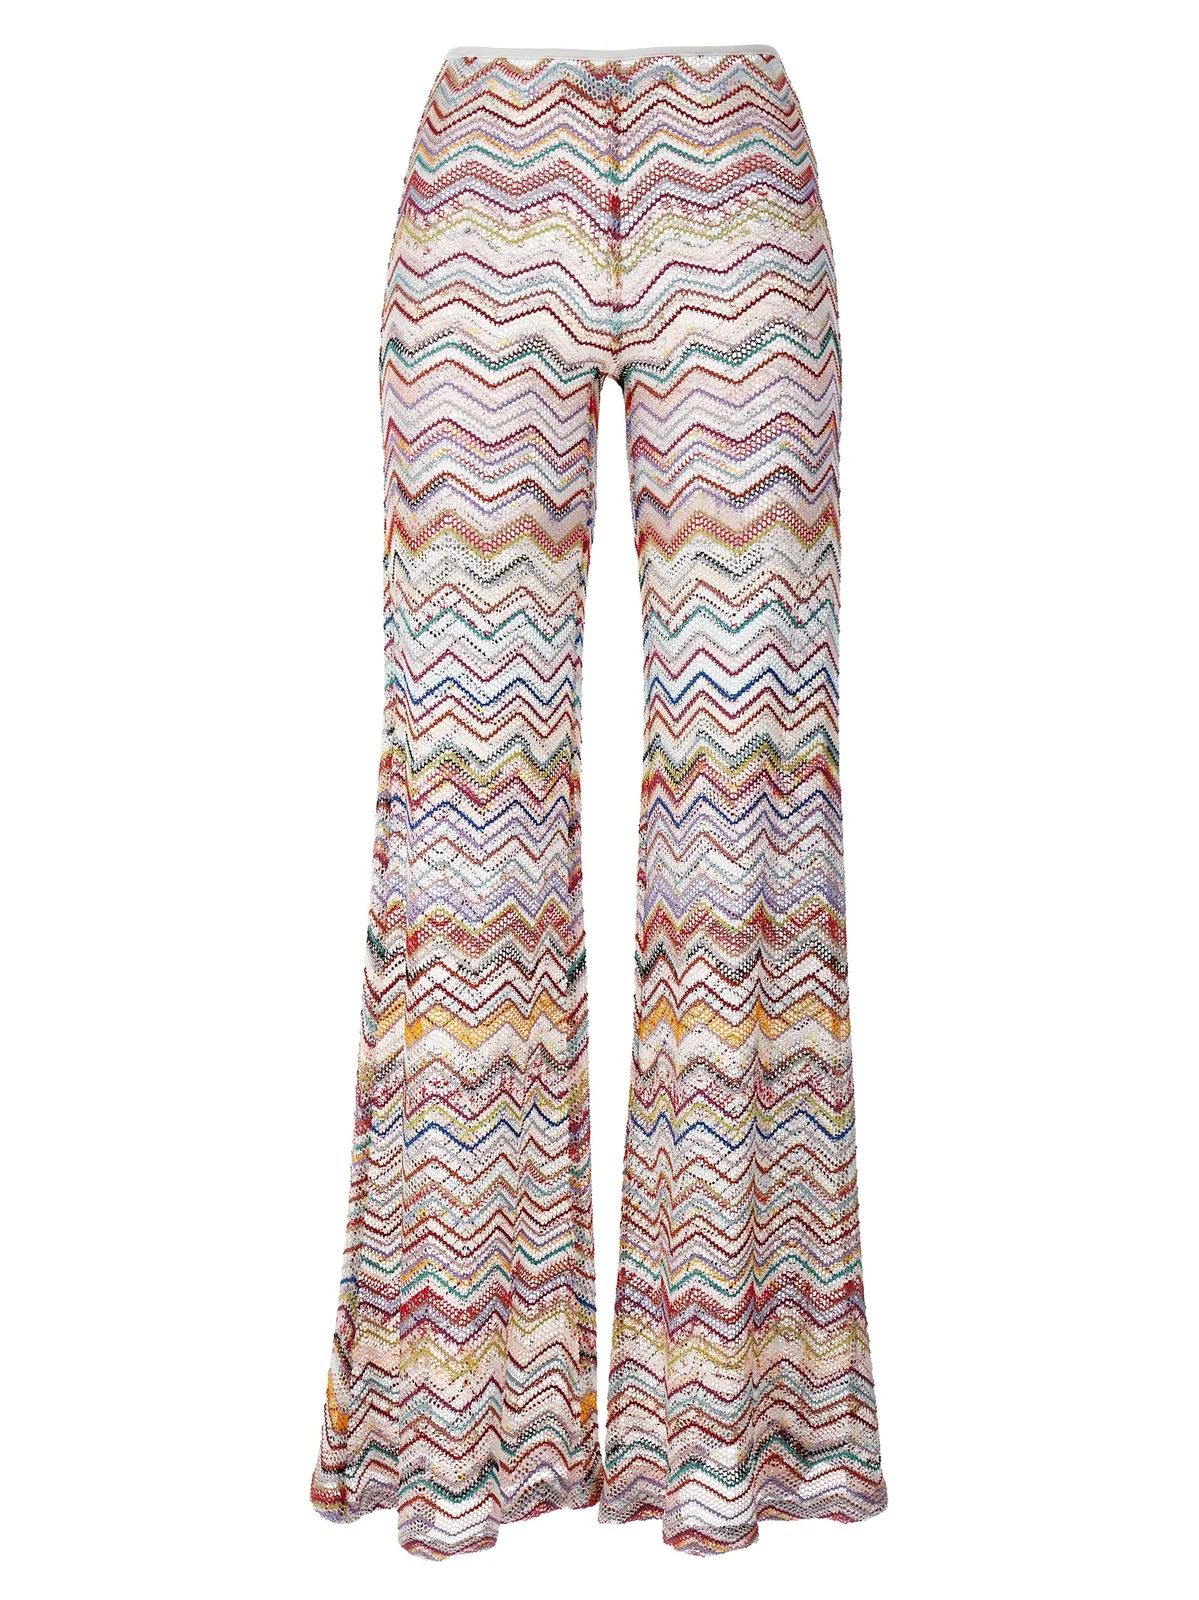 Missoni Zigzag Lurex Knitted Flared Pants | Cettire Global